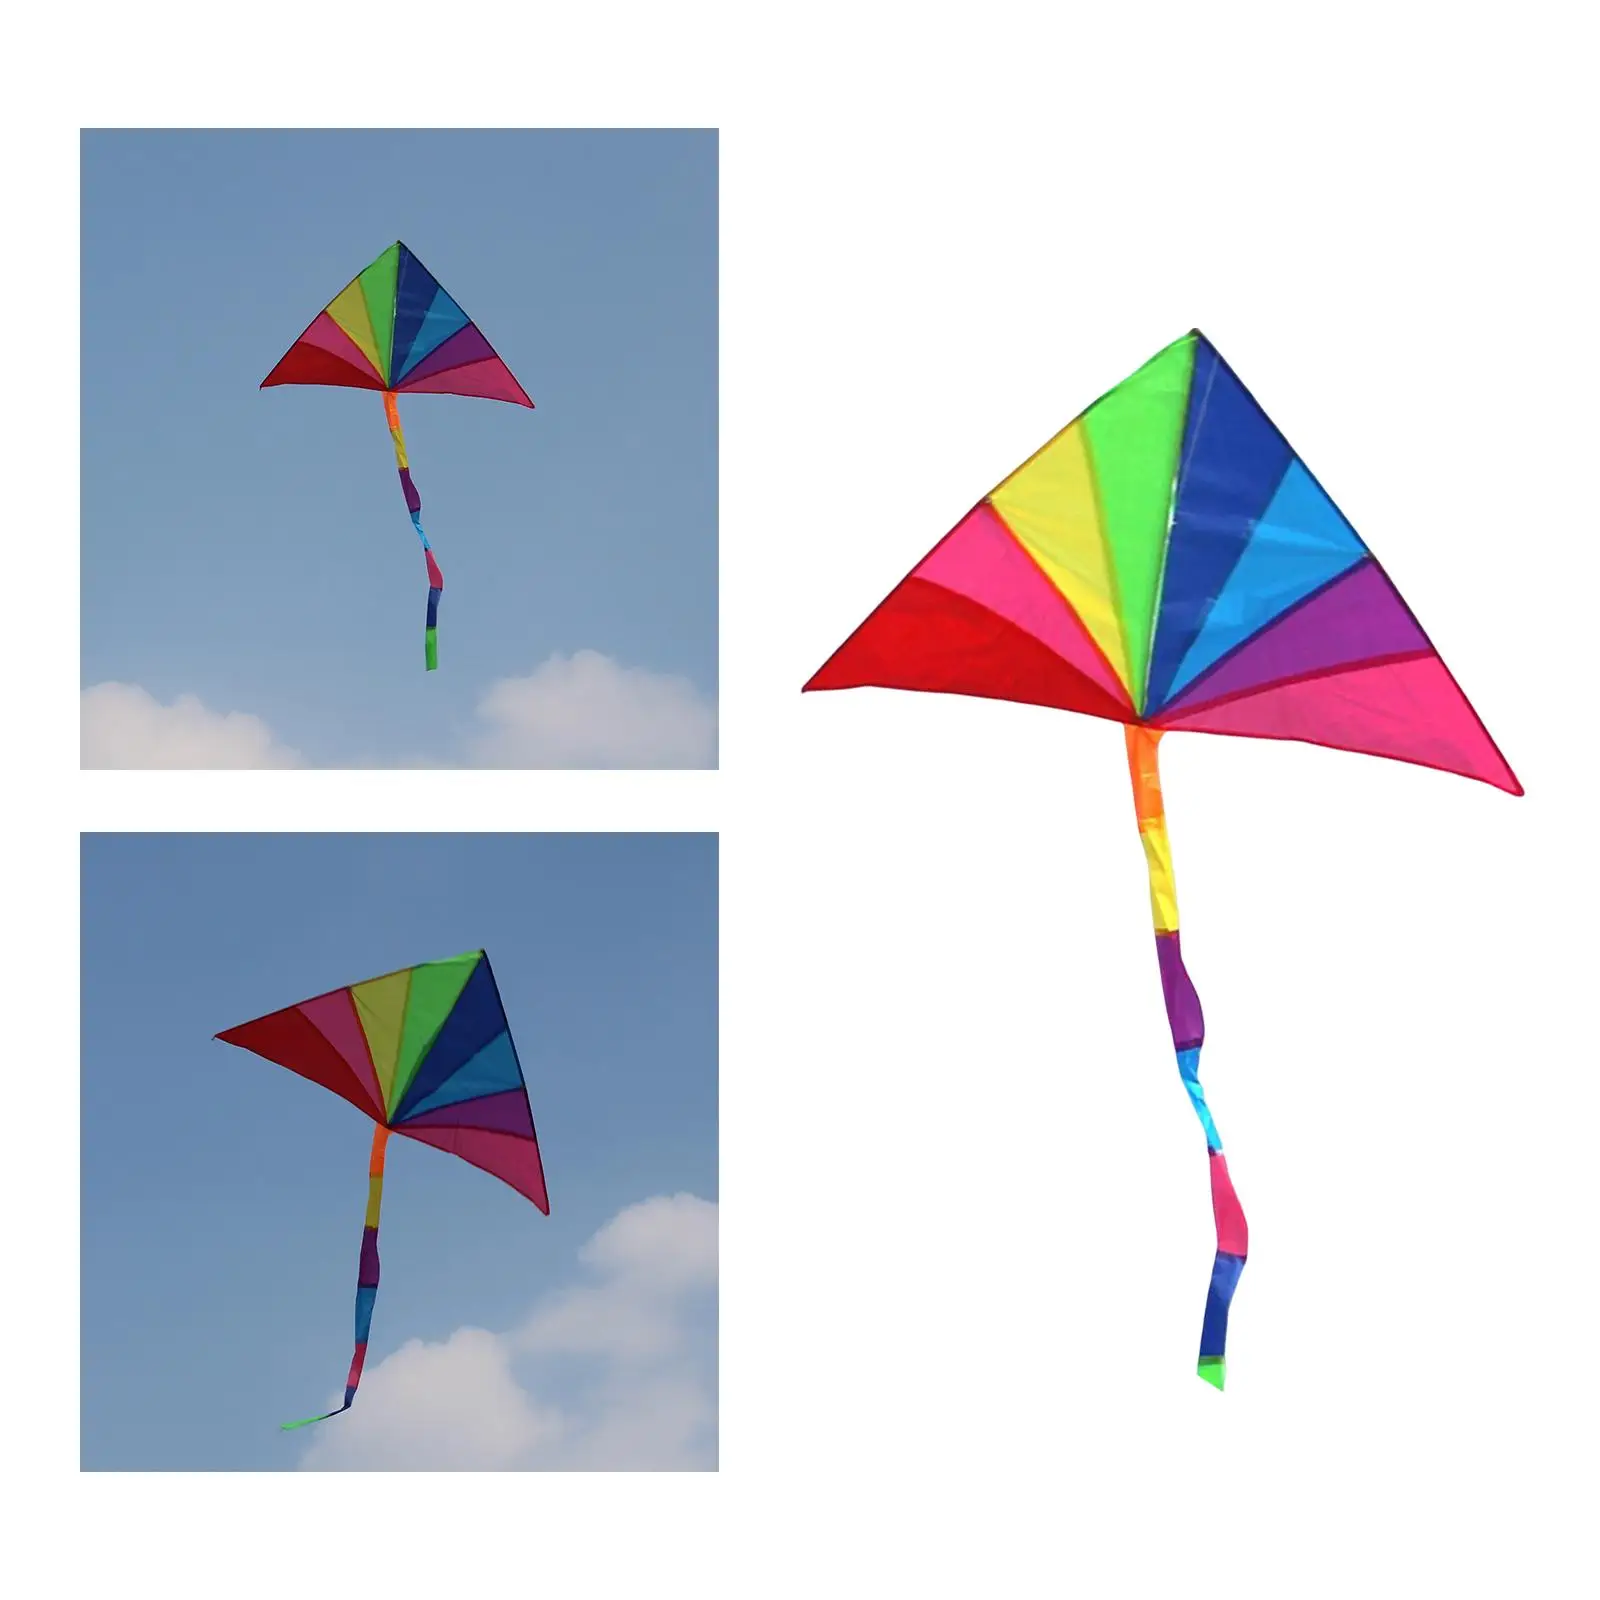 Vivid Delta Kite Single Line with Tail Easy to Fly Windsock Giant Triangle Kite for Outdoor Sports Family Trips Activities